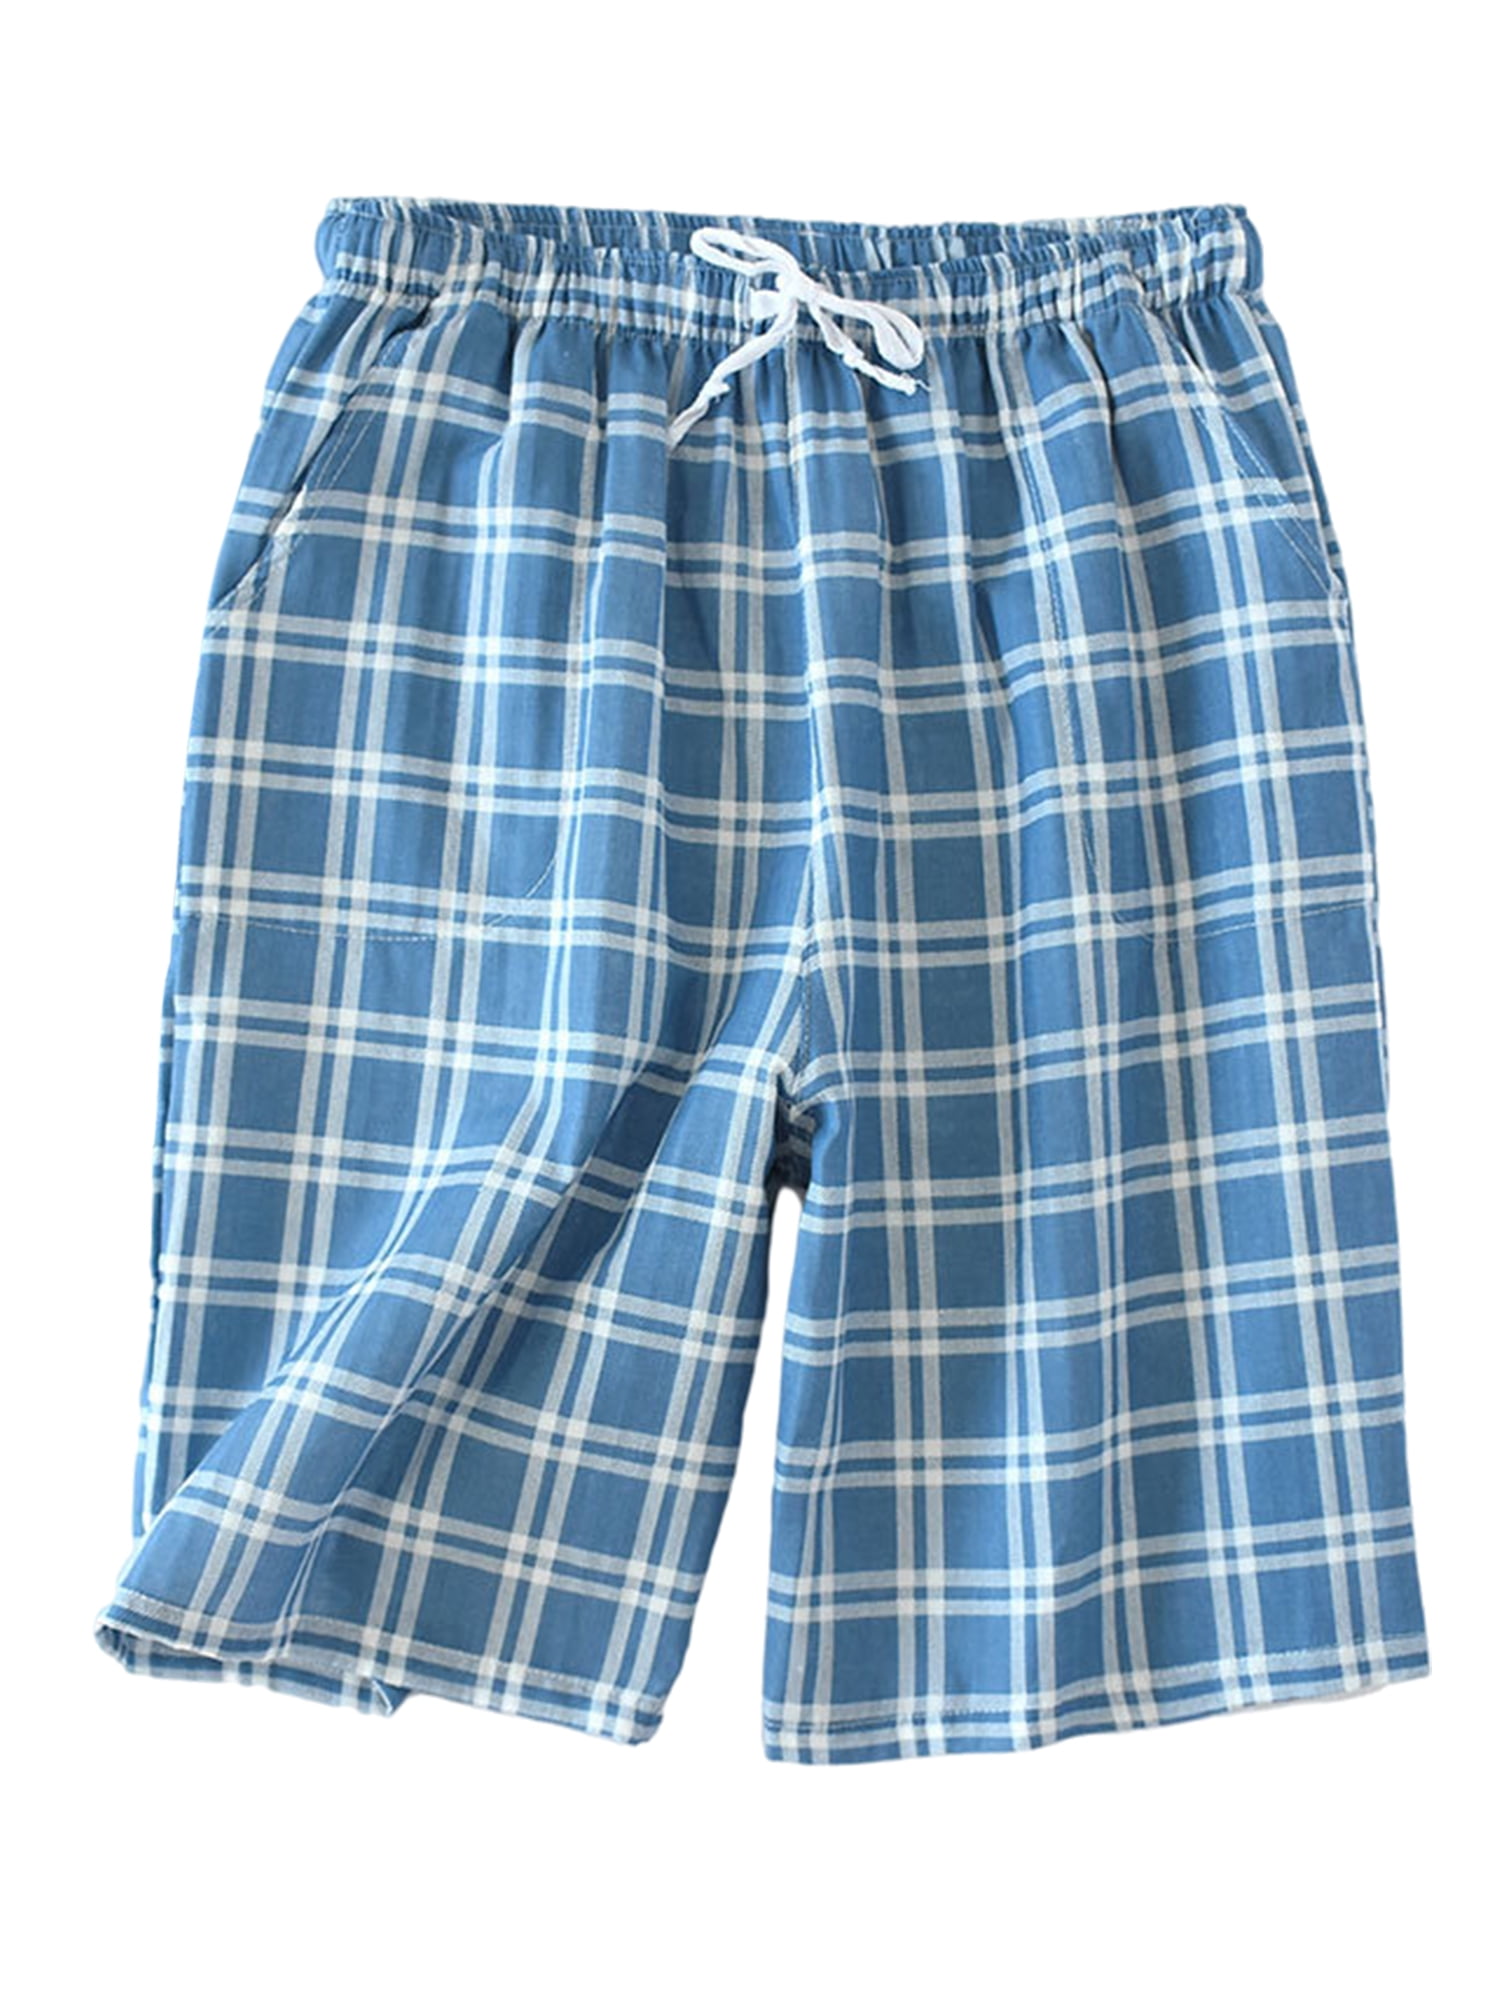 Plaid Check Soft Lightweight 100% Cotton Bottoms Shorts Elastic Waistband Pants with Pocket 